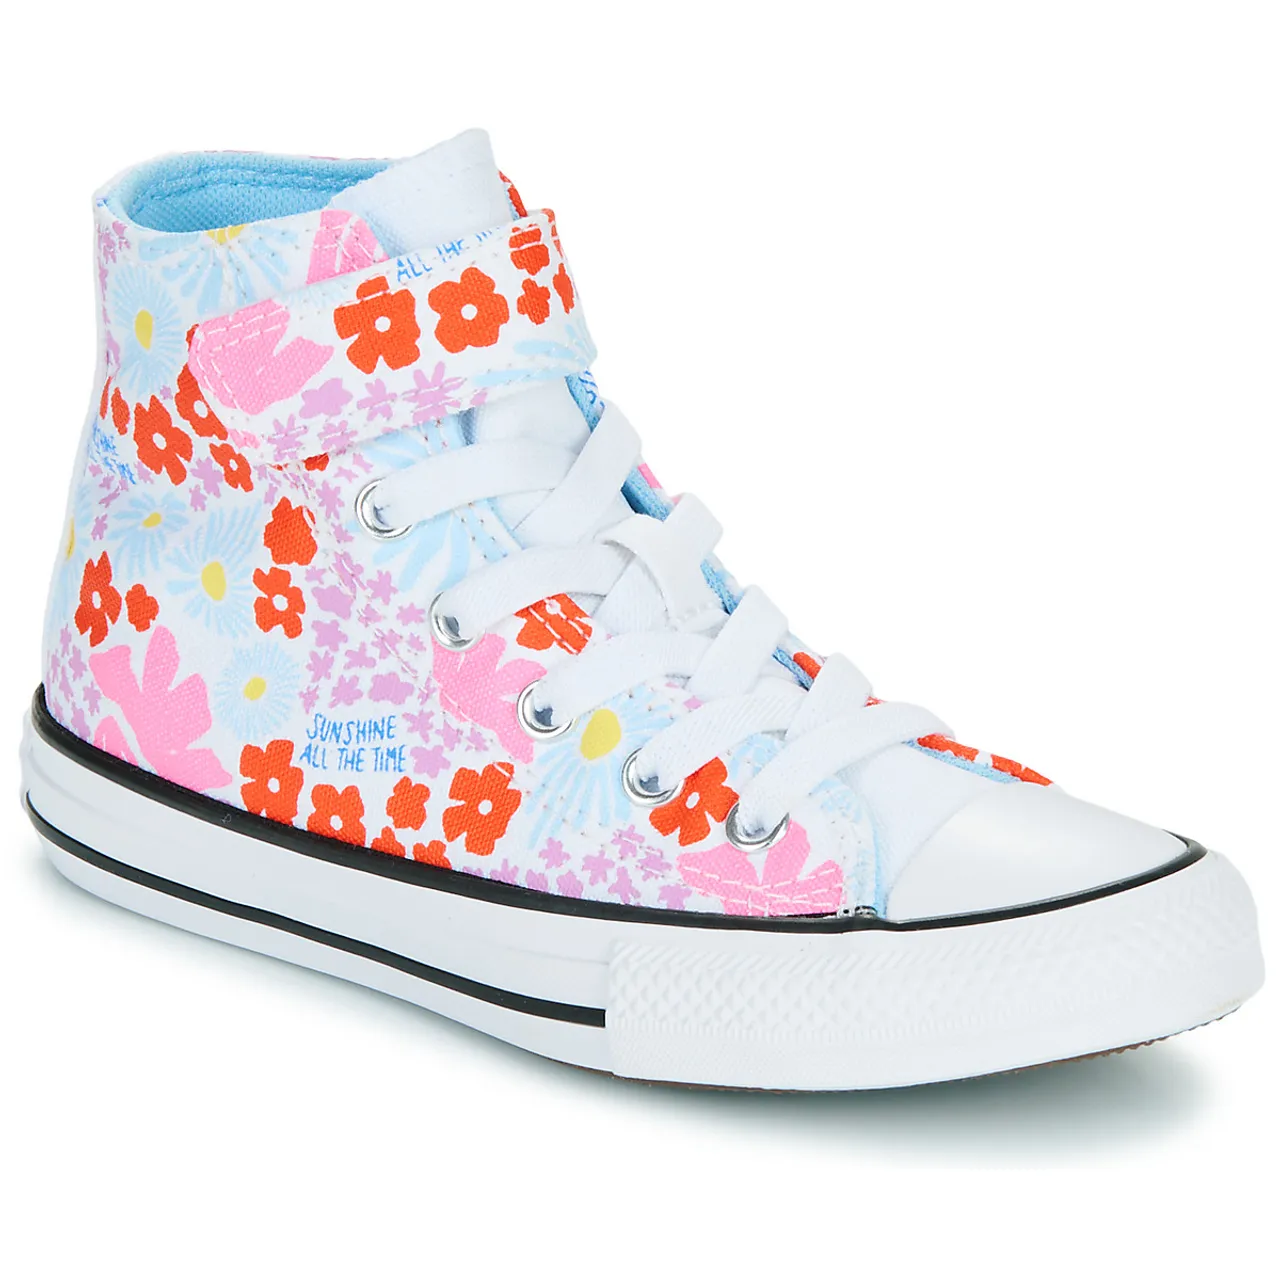 Converse  CHUCK TAYLOR ALL STAR 1V  girls's Children's Shoes (High-top Trainers) in Multicolour